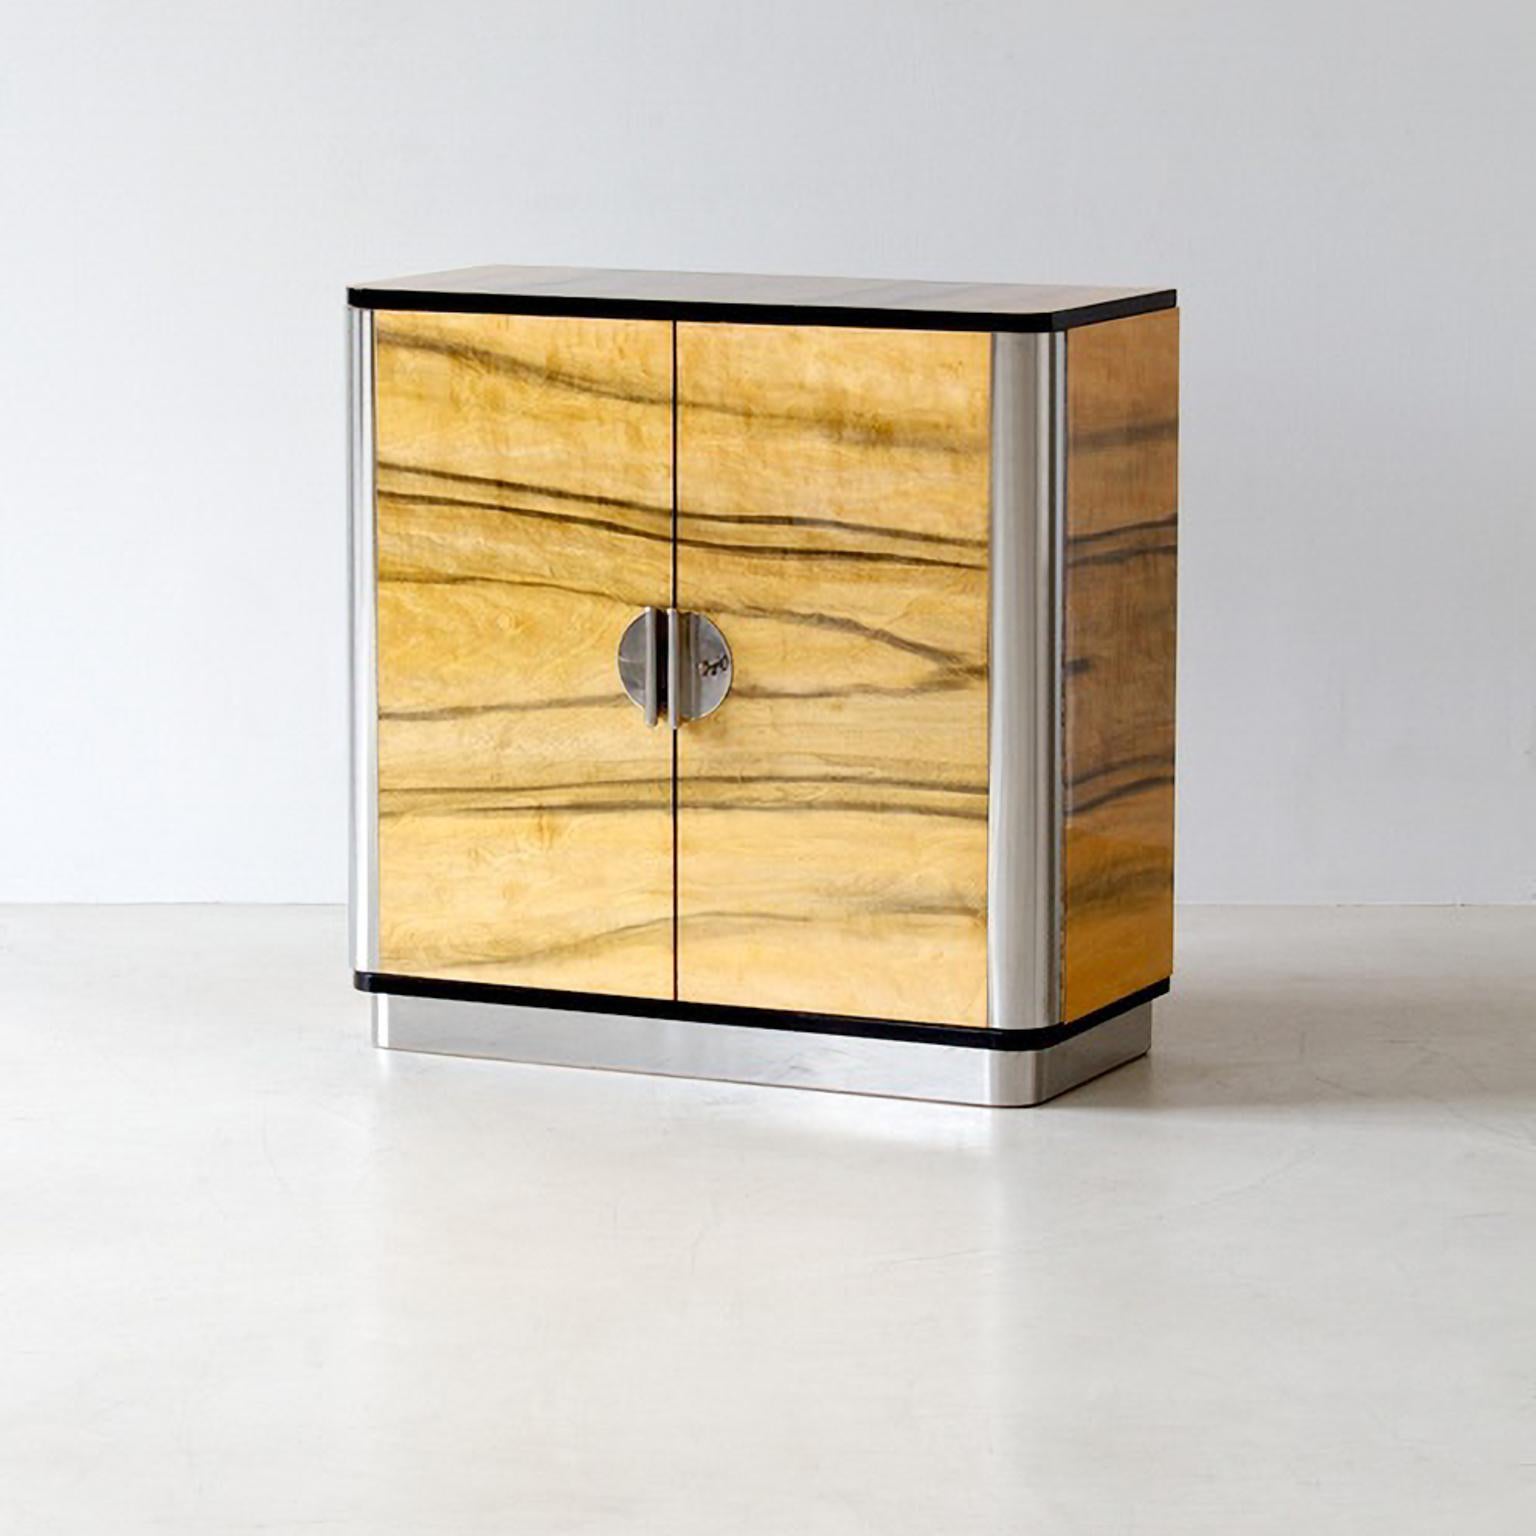 Customized two-door sideboard, manufactured by GMD Berlin, exclusively presented in our Rudolf Vichr Collection.

These high-quality, handmade furniture in a classic modern timeless design, are made from selected materials according to traditional